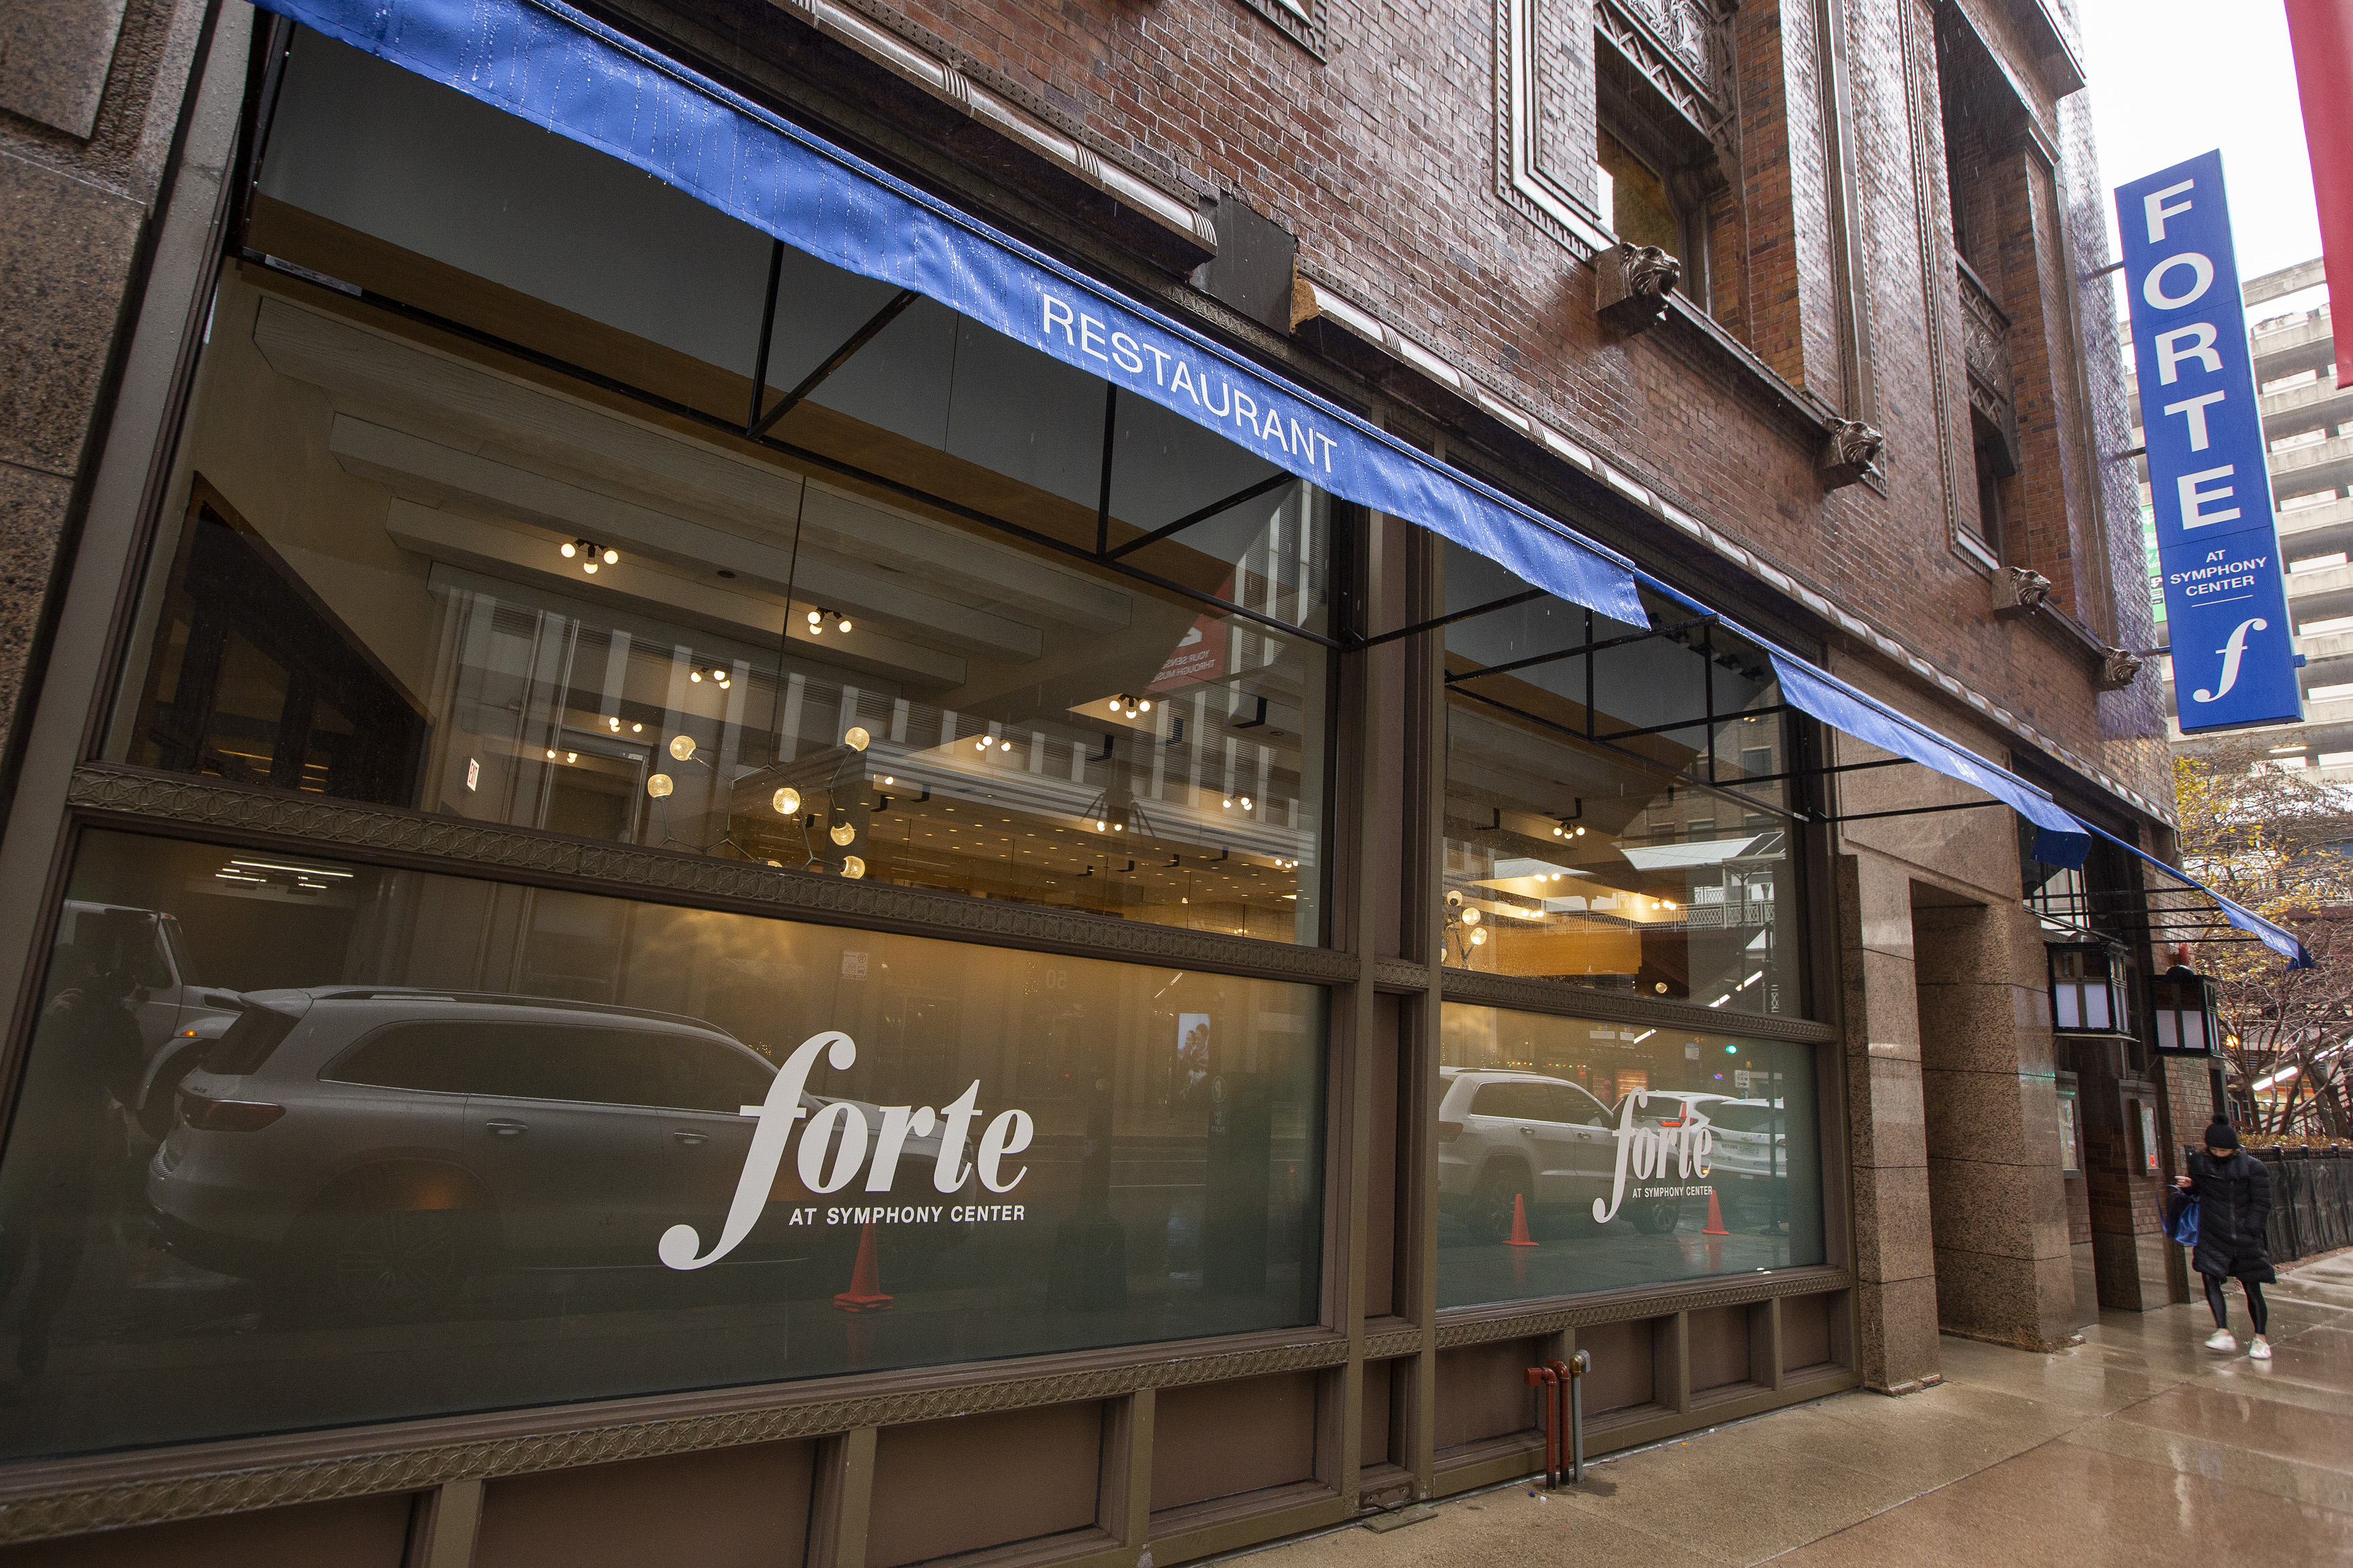 The exterior of a brick restaurant with large windows that read “Forte.”